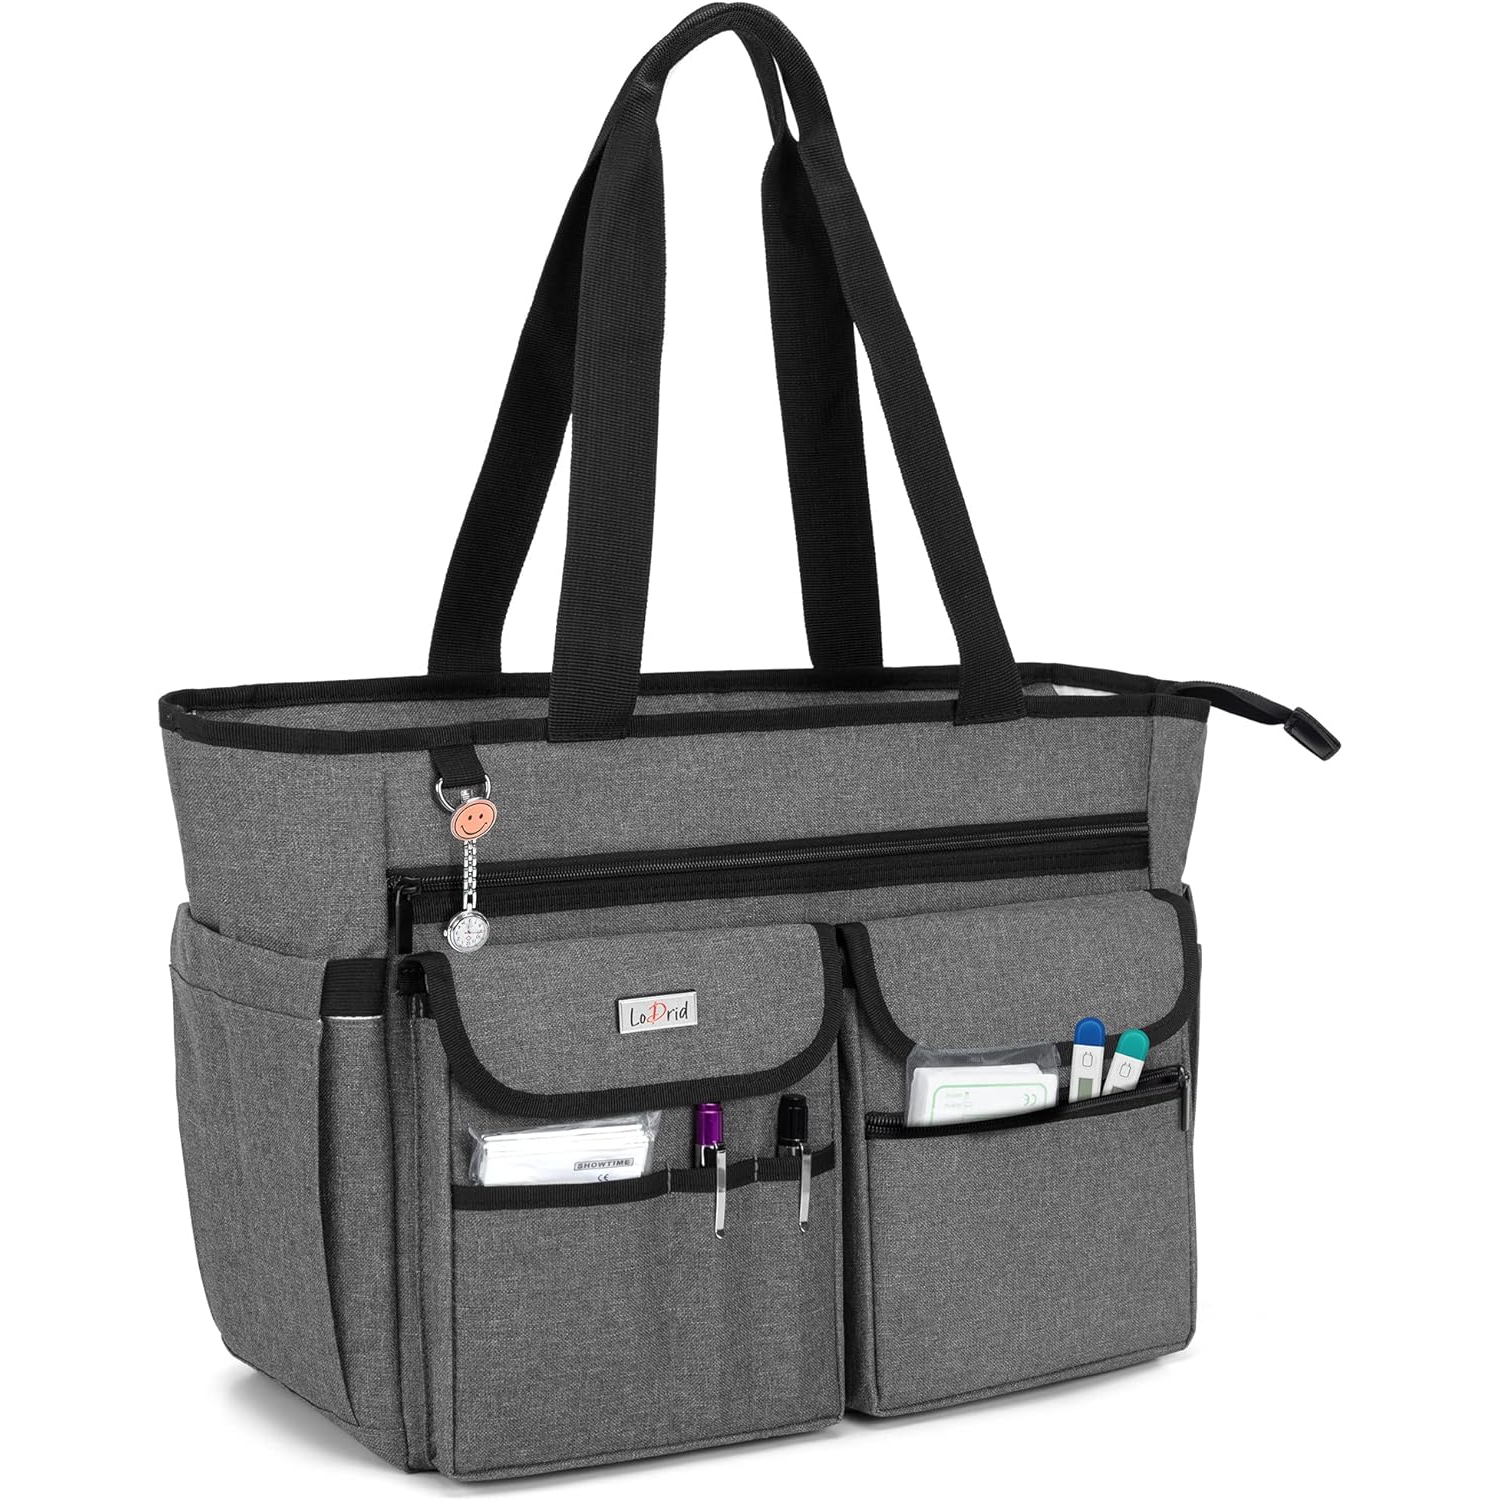 Nurse Tote Bag with Bottom Padded Pad, Nurse Bags and Totes for Work, with Separated Storage Laptop Layer (up to